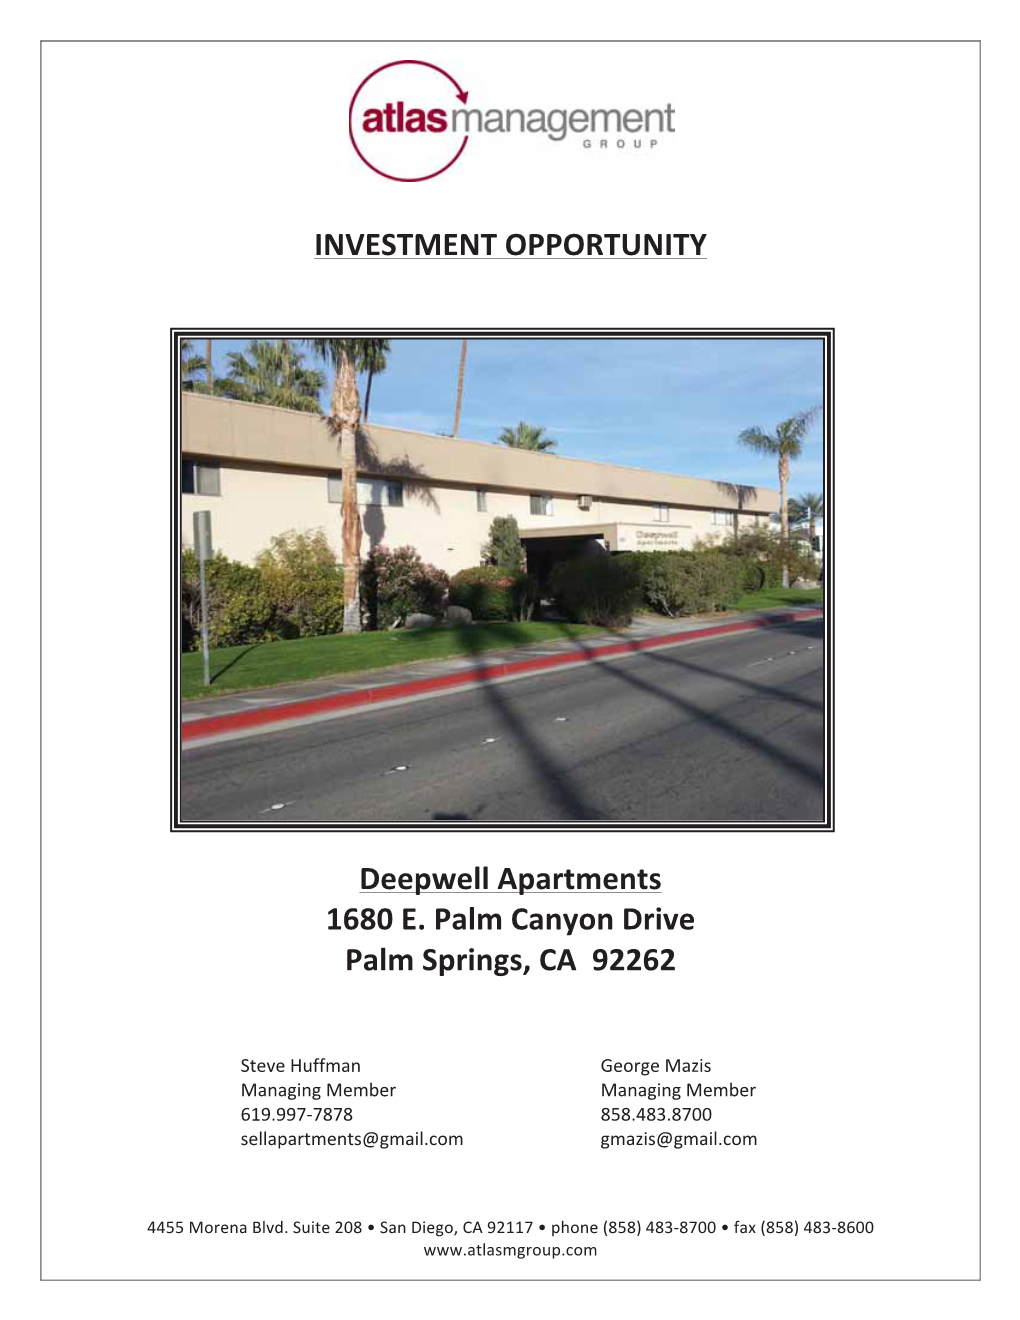 INVESTMENT OPPORTUNITY Deepwell Apartments 1680 E. Palm Canyon Drive Palm Springs, CA 92262